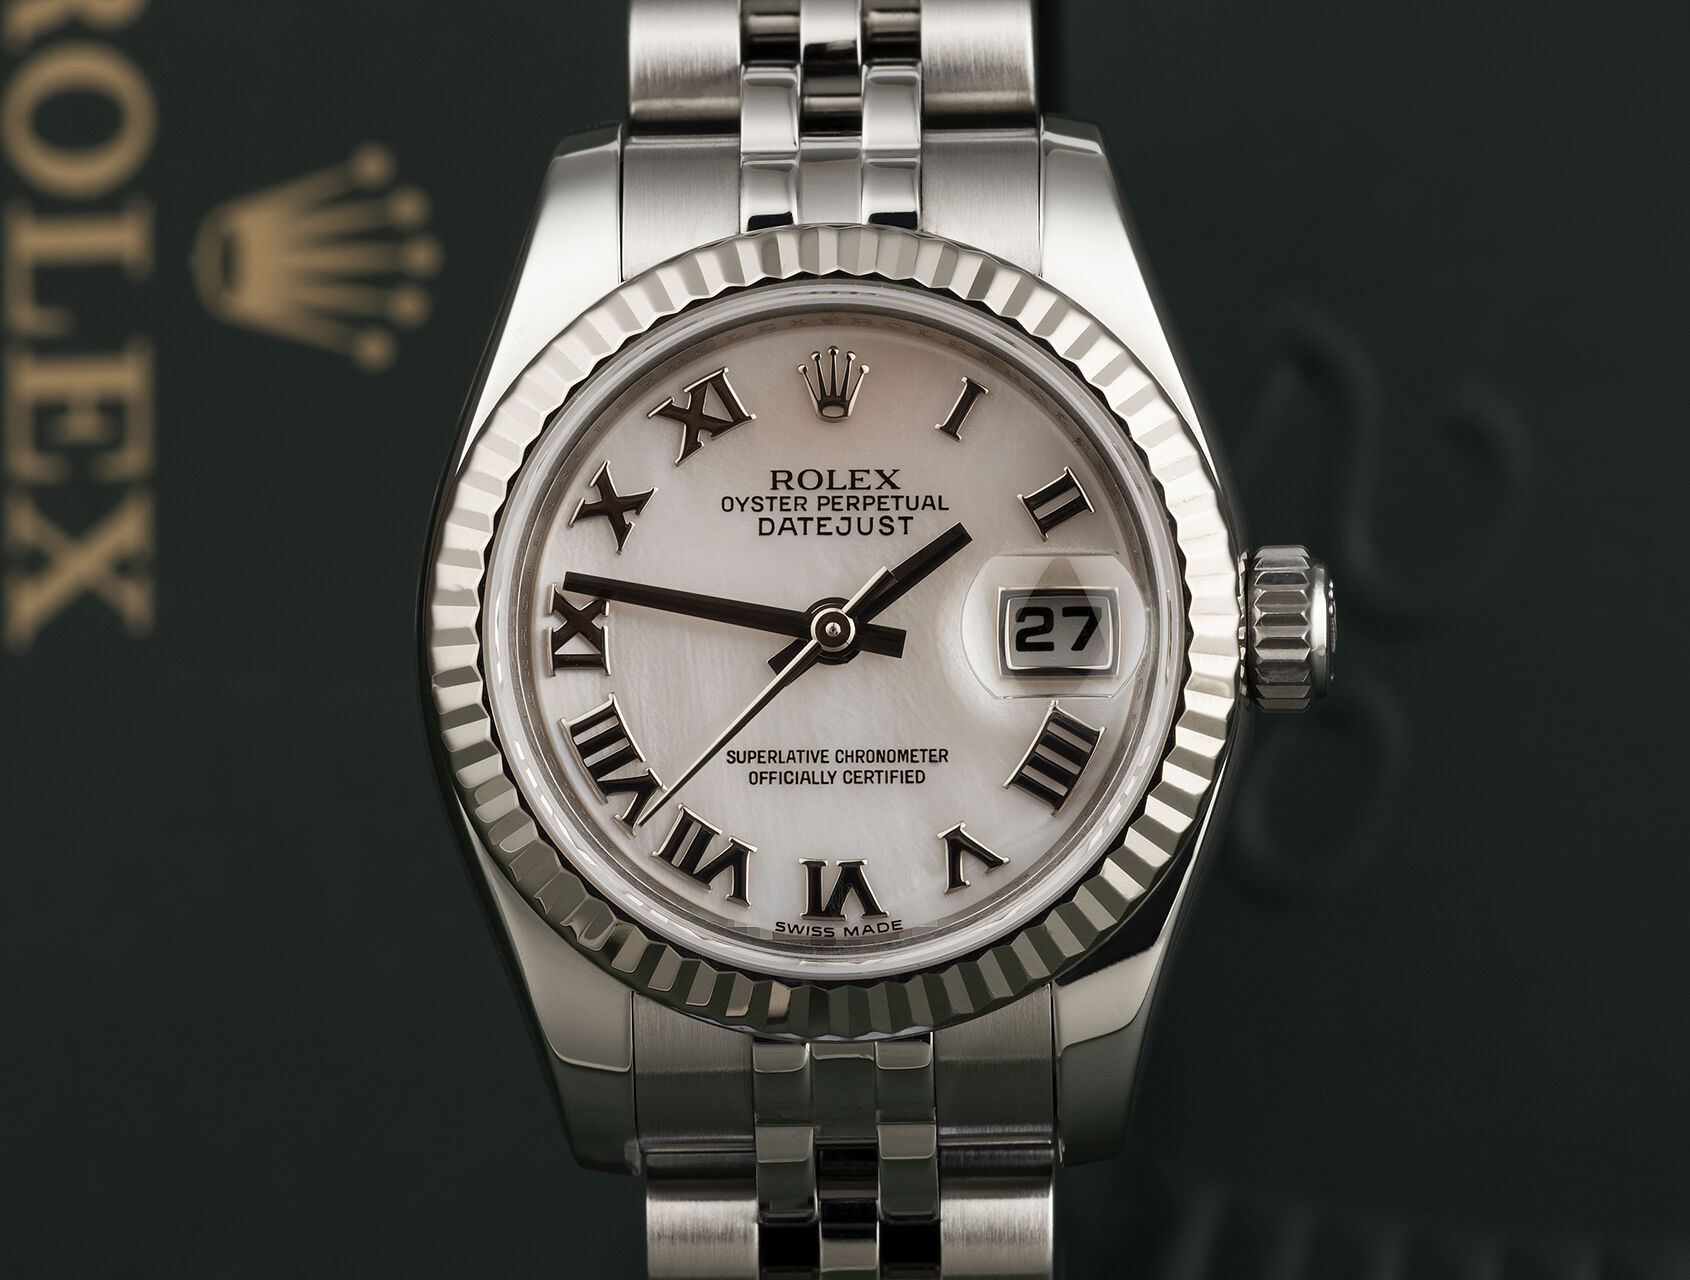 ref 179174 | 179174 - Mother of Pearl | Rolex Datejust